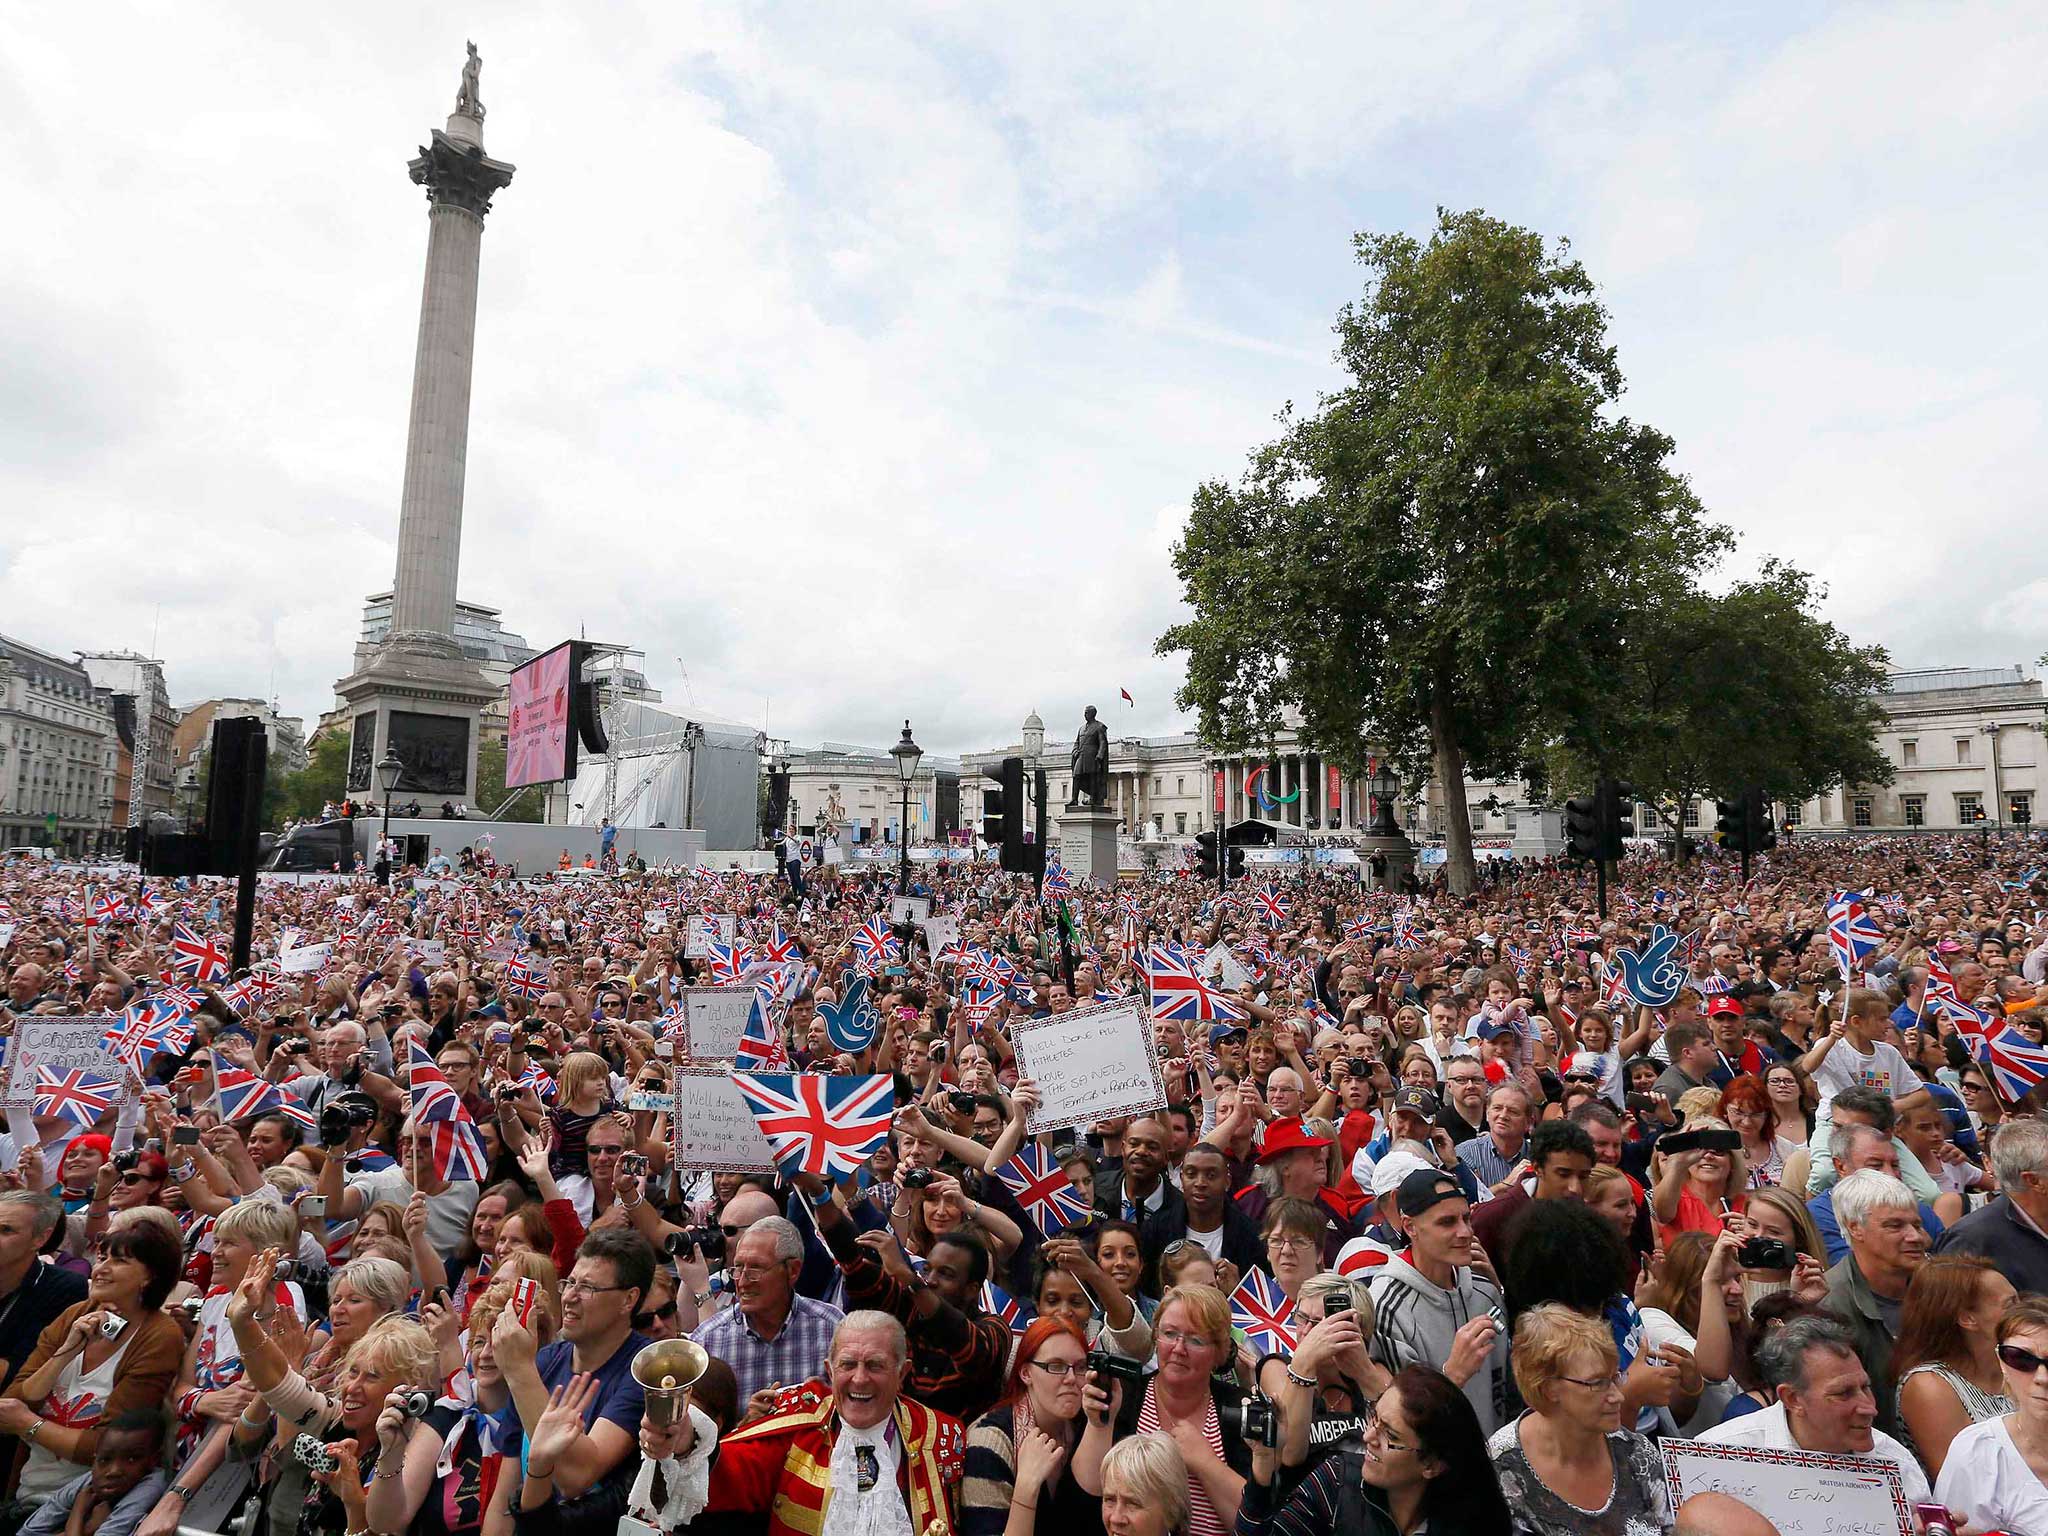 The parade in 2012 attracted a crowd of thousands to London